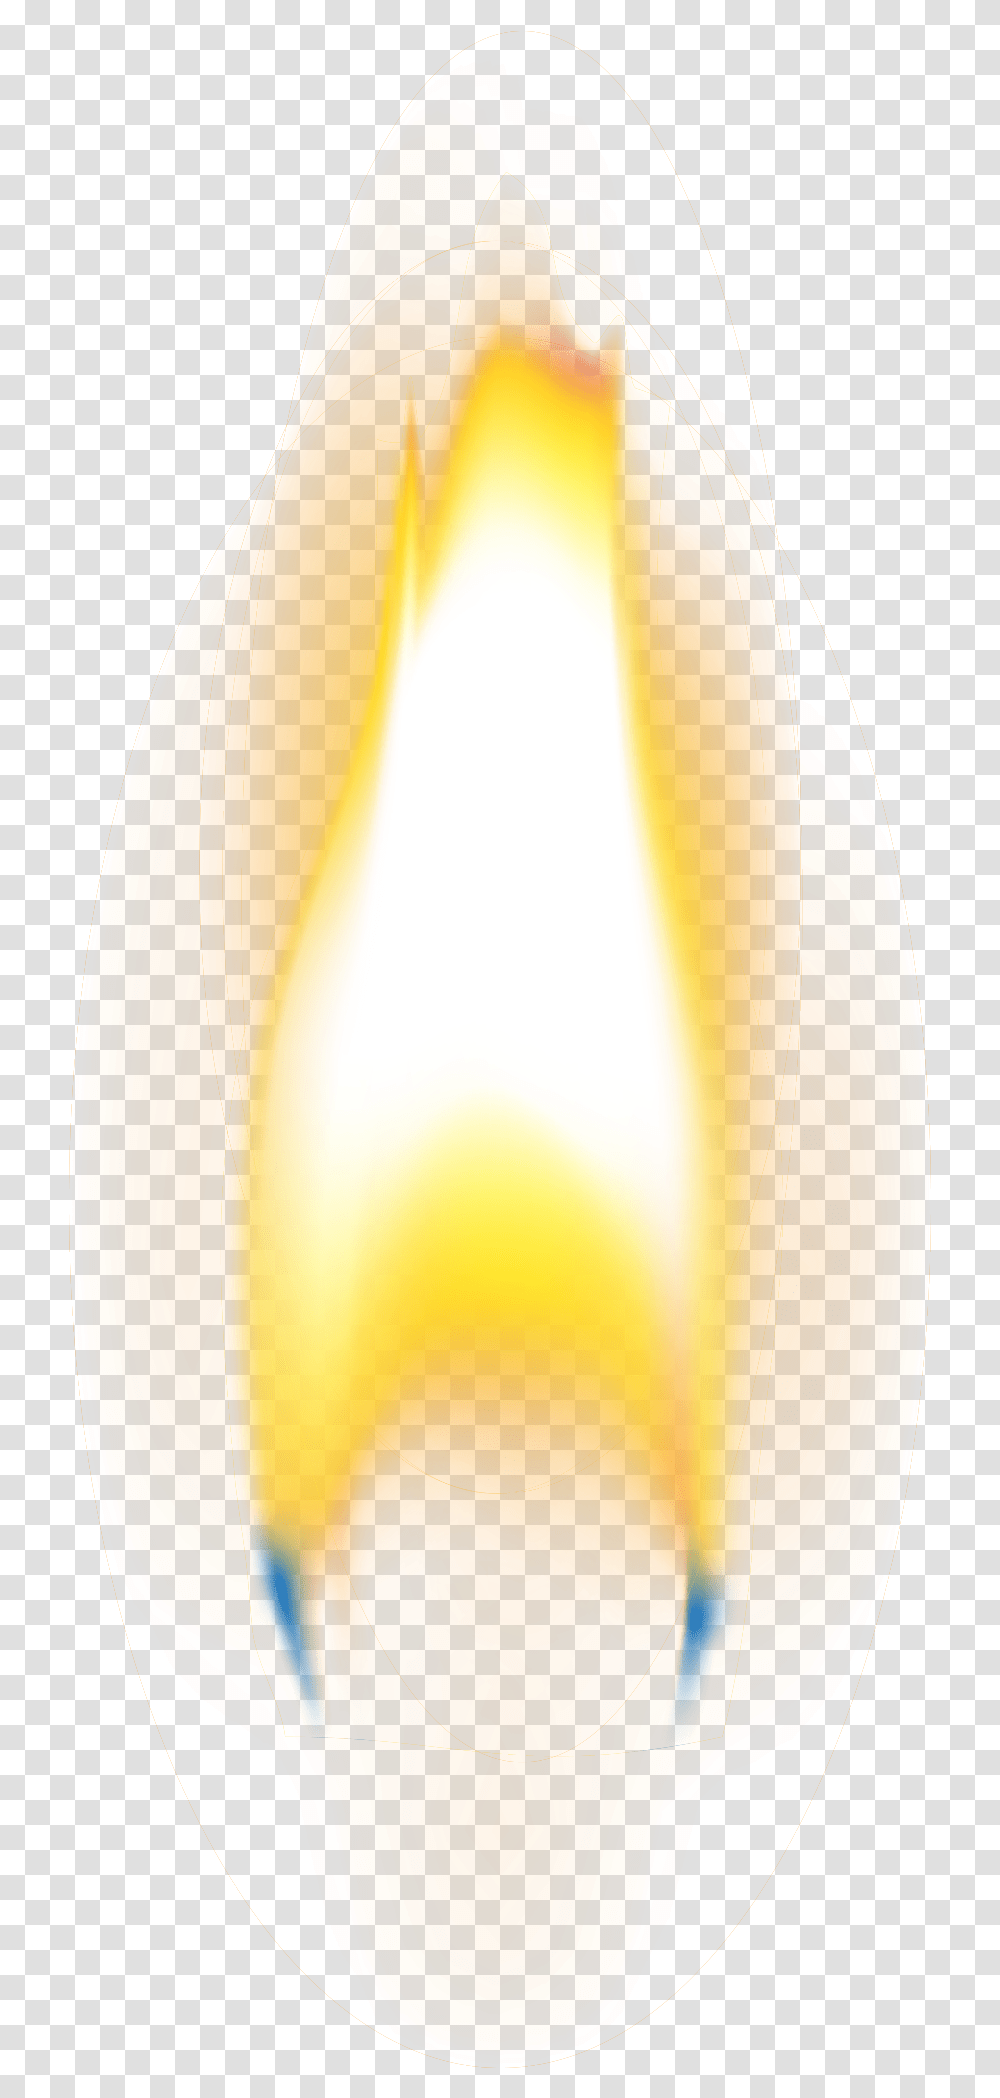 Realistic Candle Flame Download Background Candle Flame, Fire, Balloon, Pac Man Transparent Png